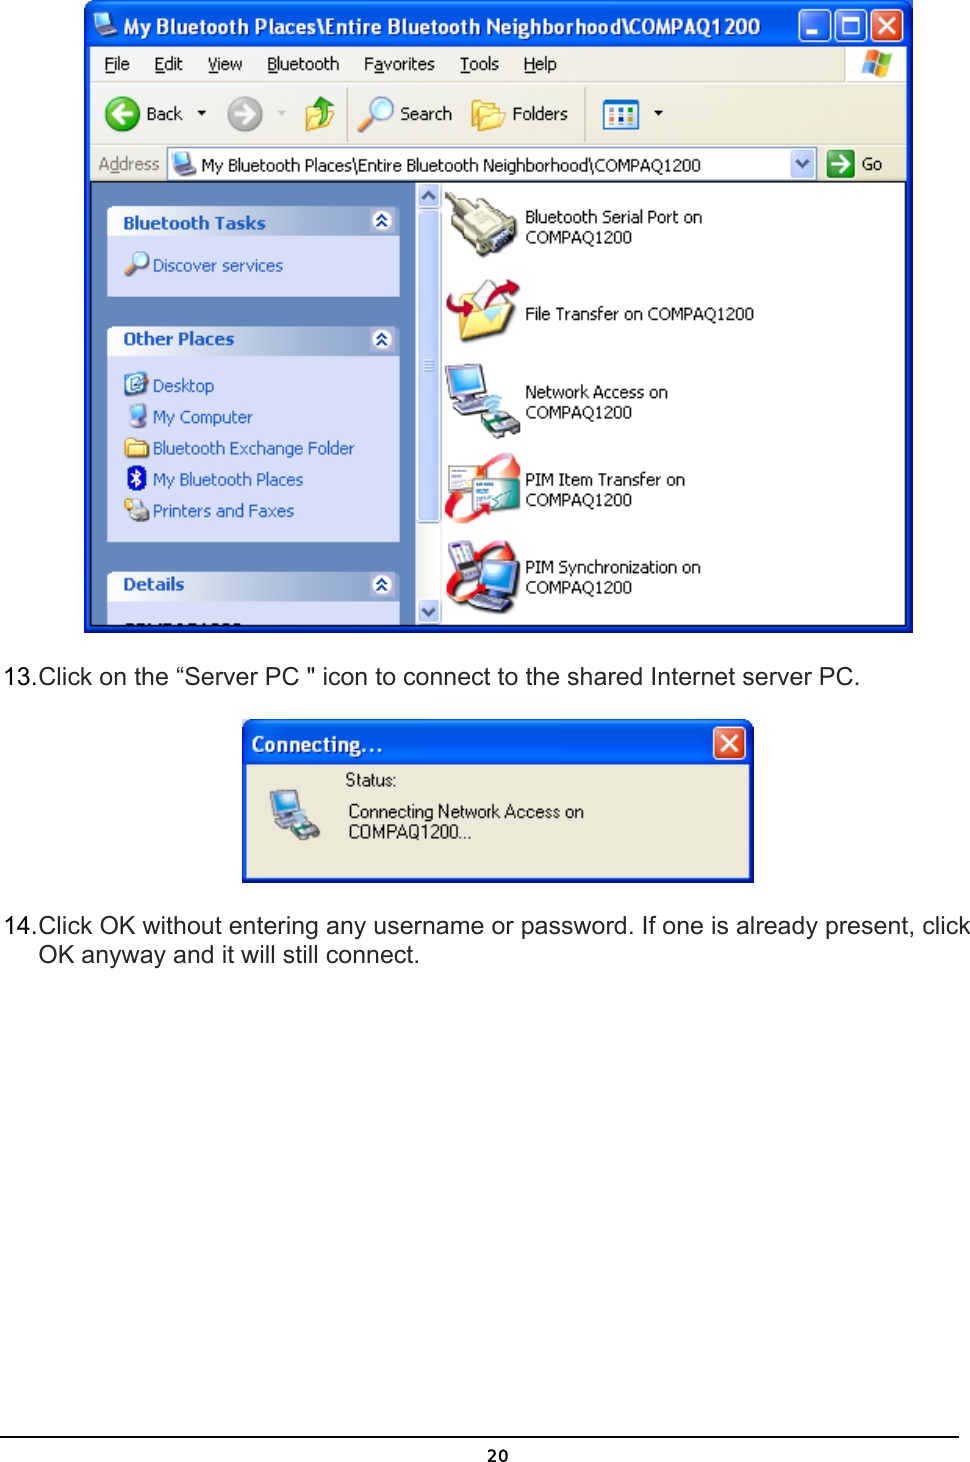   20 13. Click on the “Server PC &quot; icon to connect to the shared Internet server PC.  14. Click OK without entering any username or password. If one is already present, click OK anyway and it will still connect. 